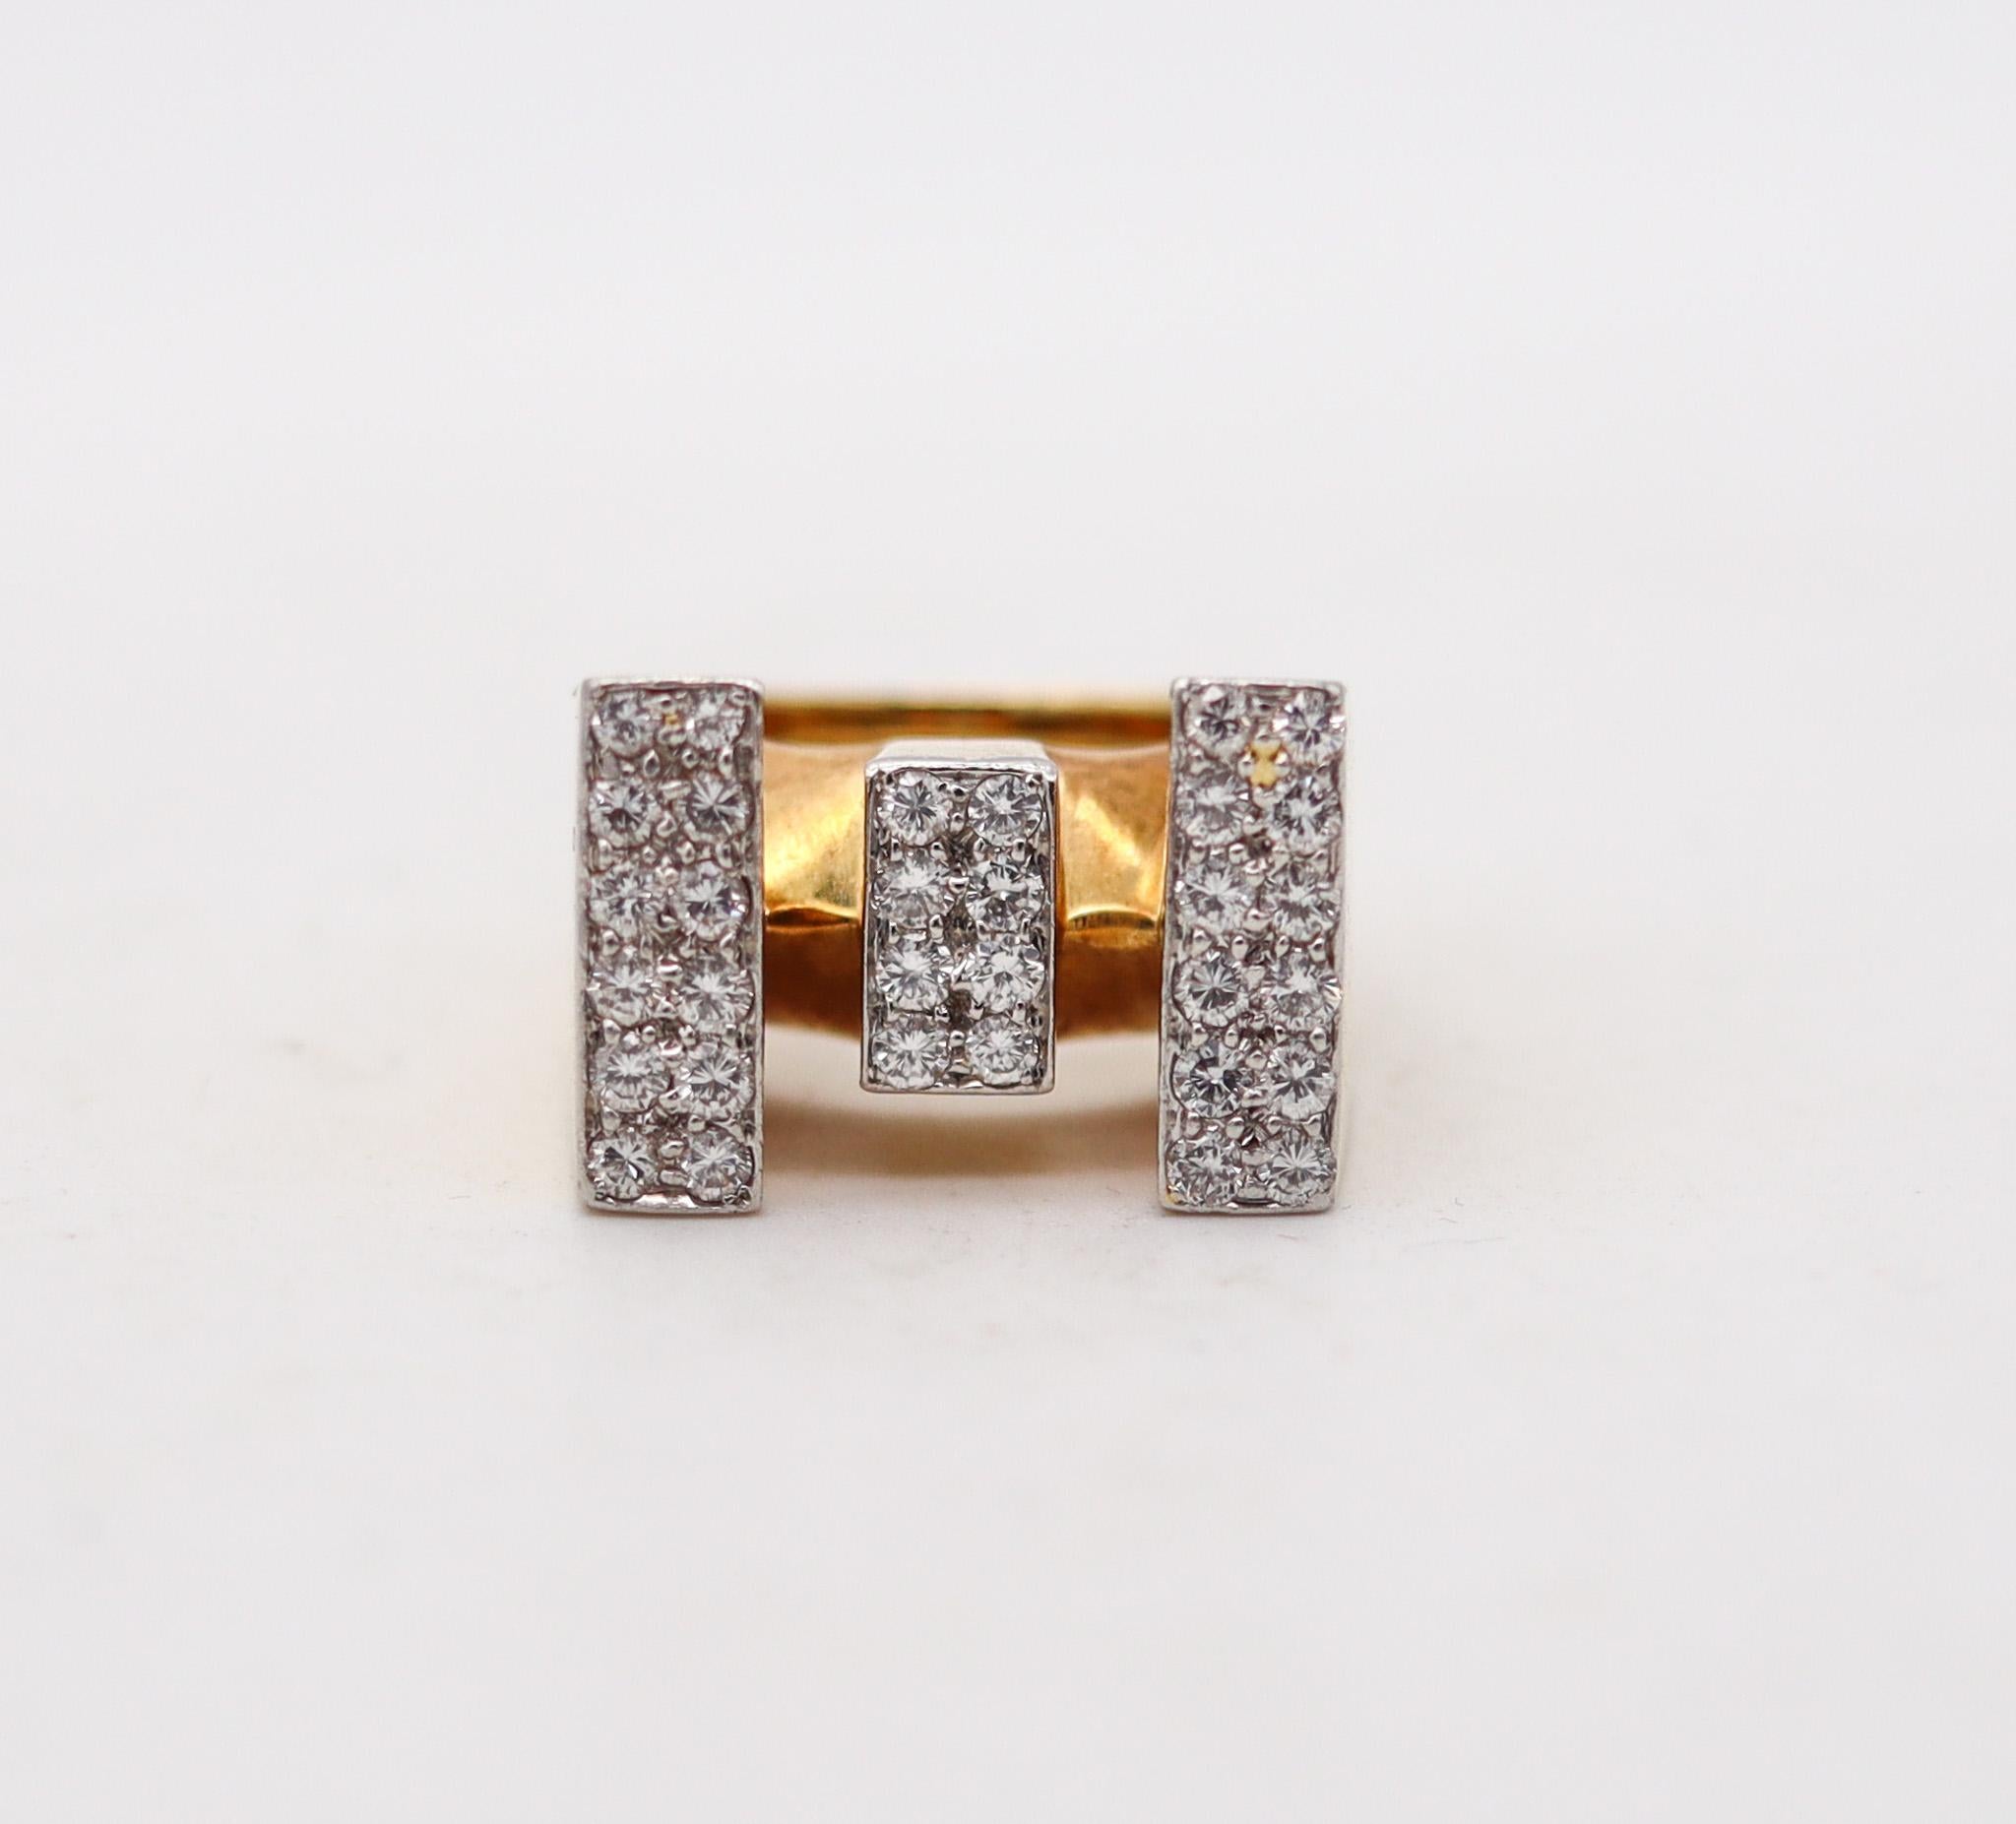 Modernist Cartier 1970 Geometric Cocktail Ring In 18Kt Yellow Gold With 1.60 Ctw Diamond For Sale